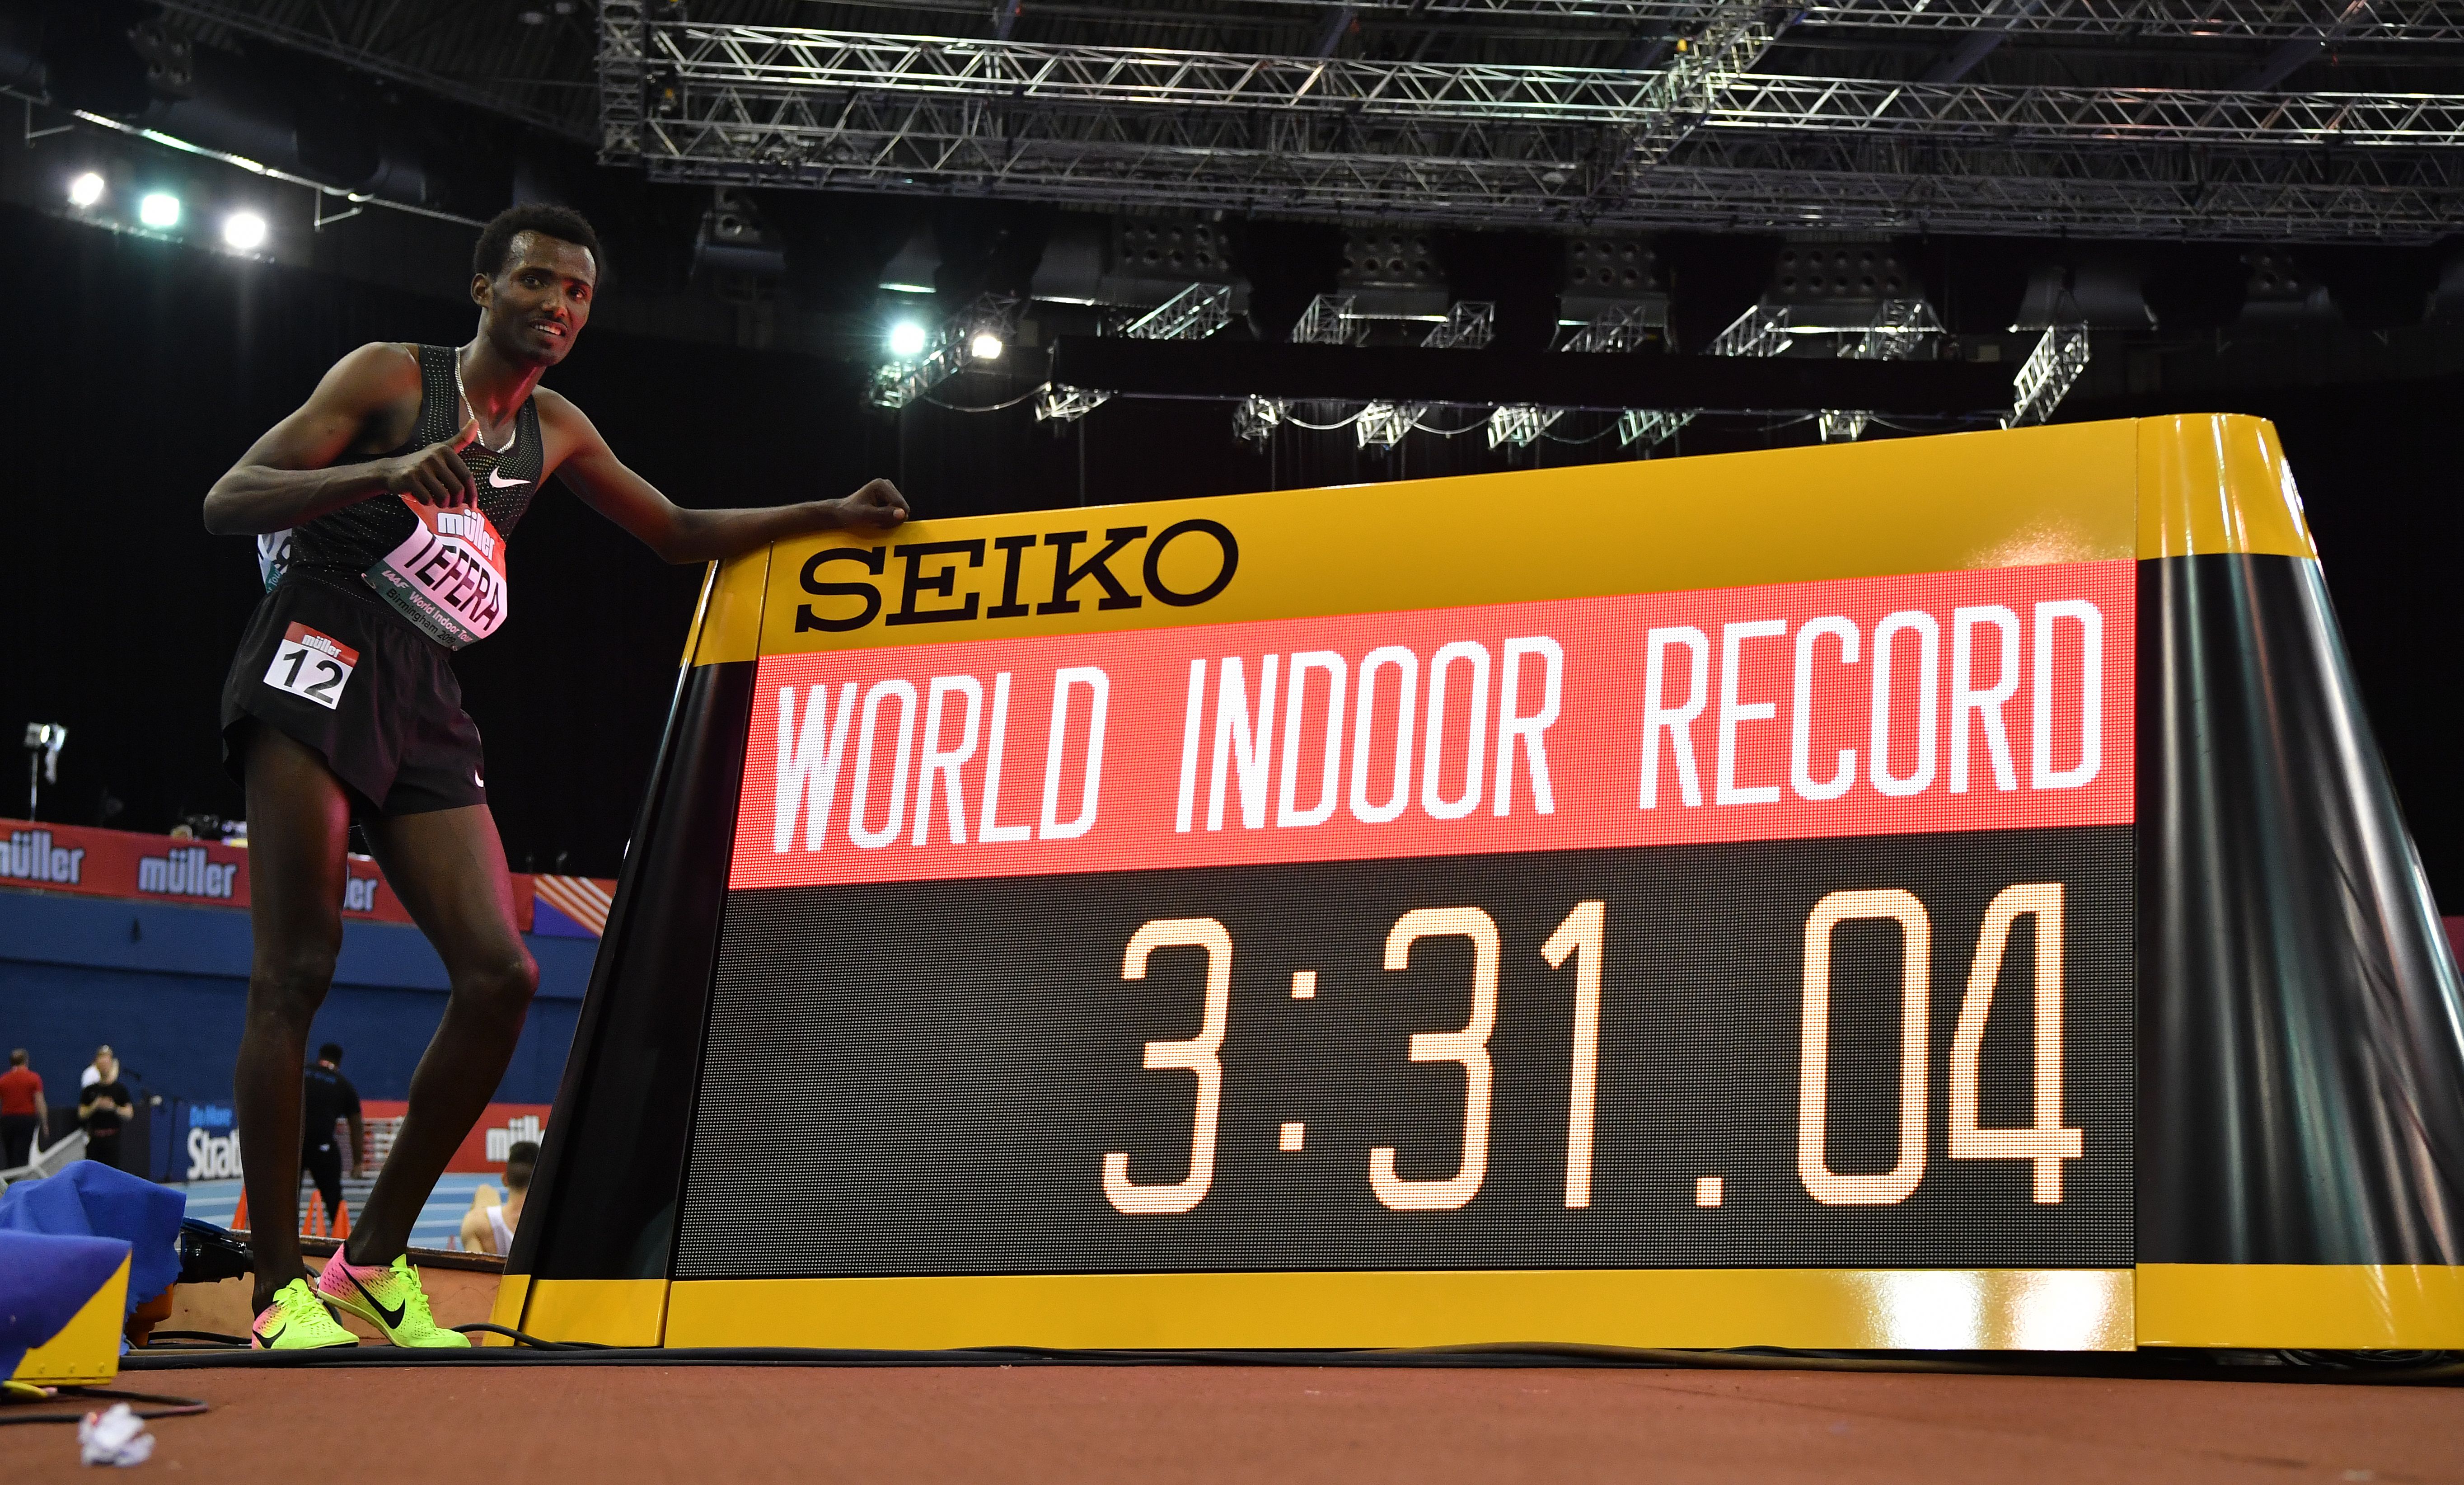 TEFERA STEALS THE SHOW WITH 1500M WORLD INDOOR RECORD AS MUIR CLAIMS YET ANOTHER GB RECORD